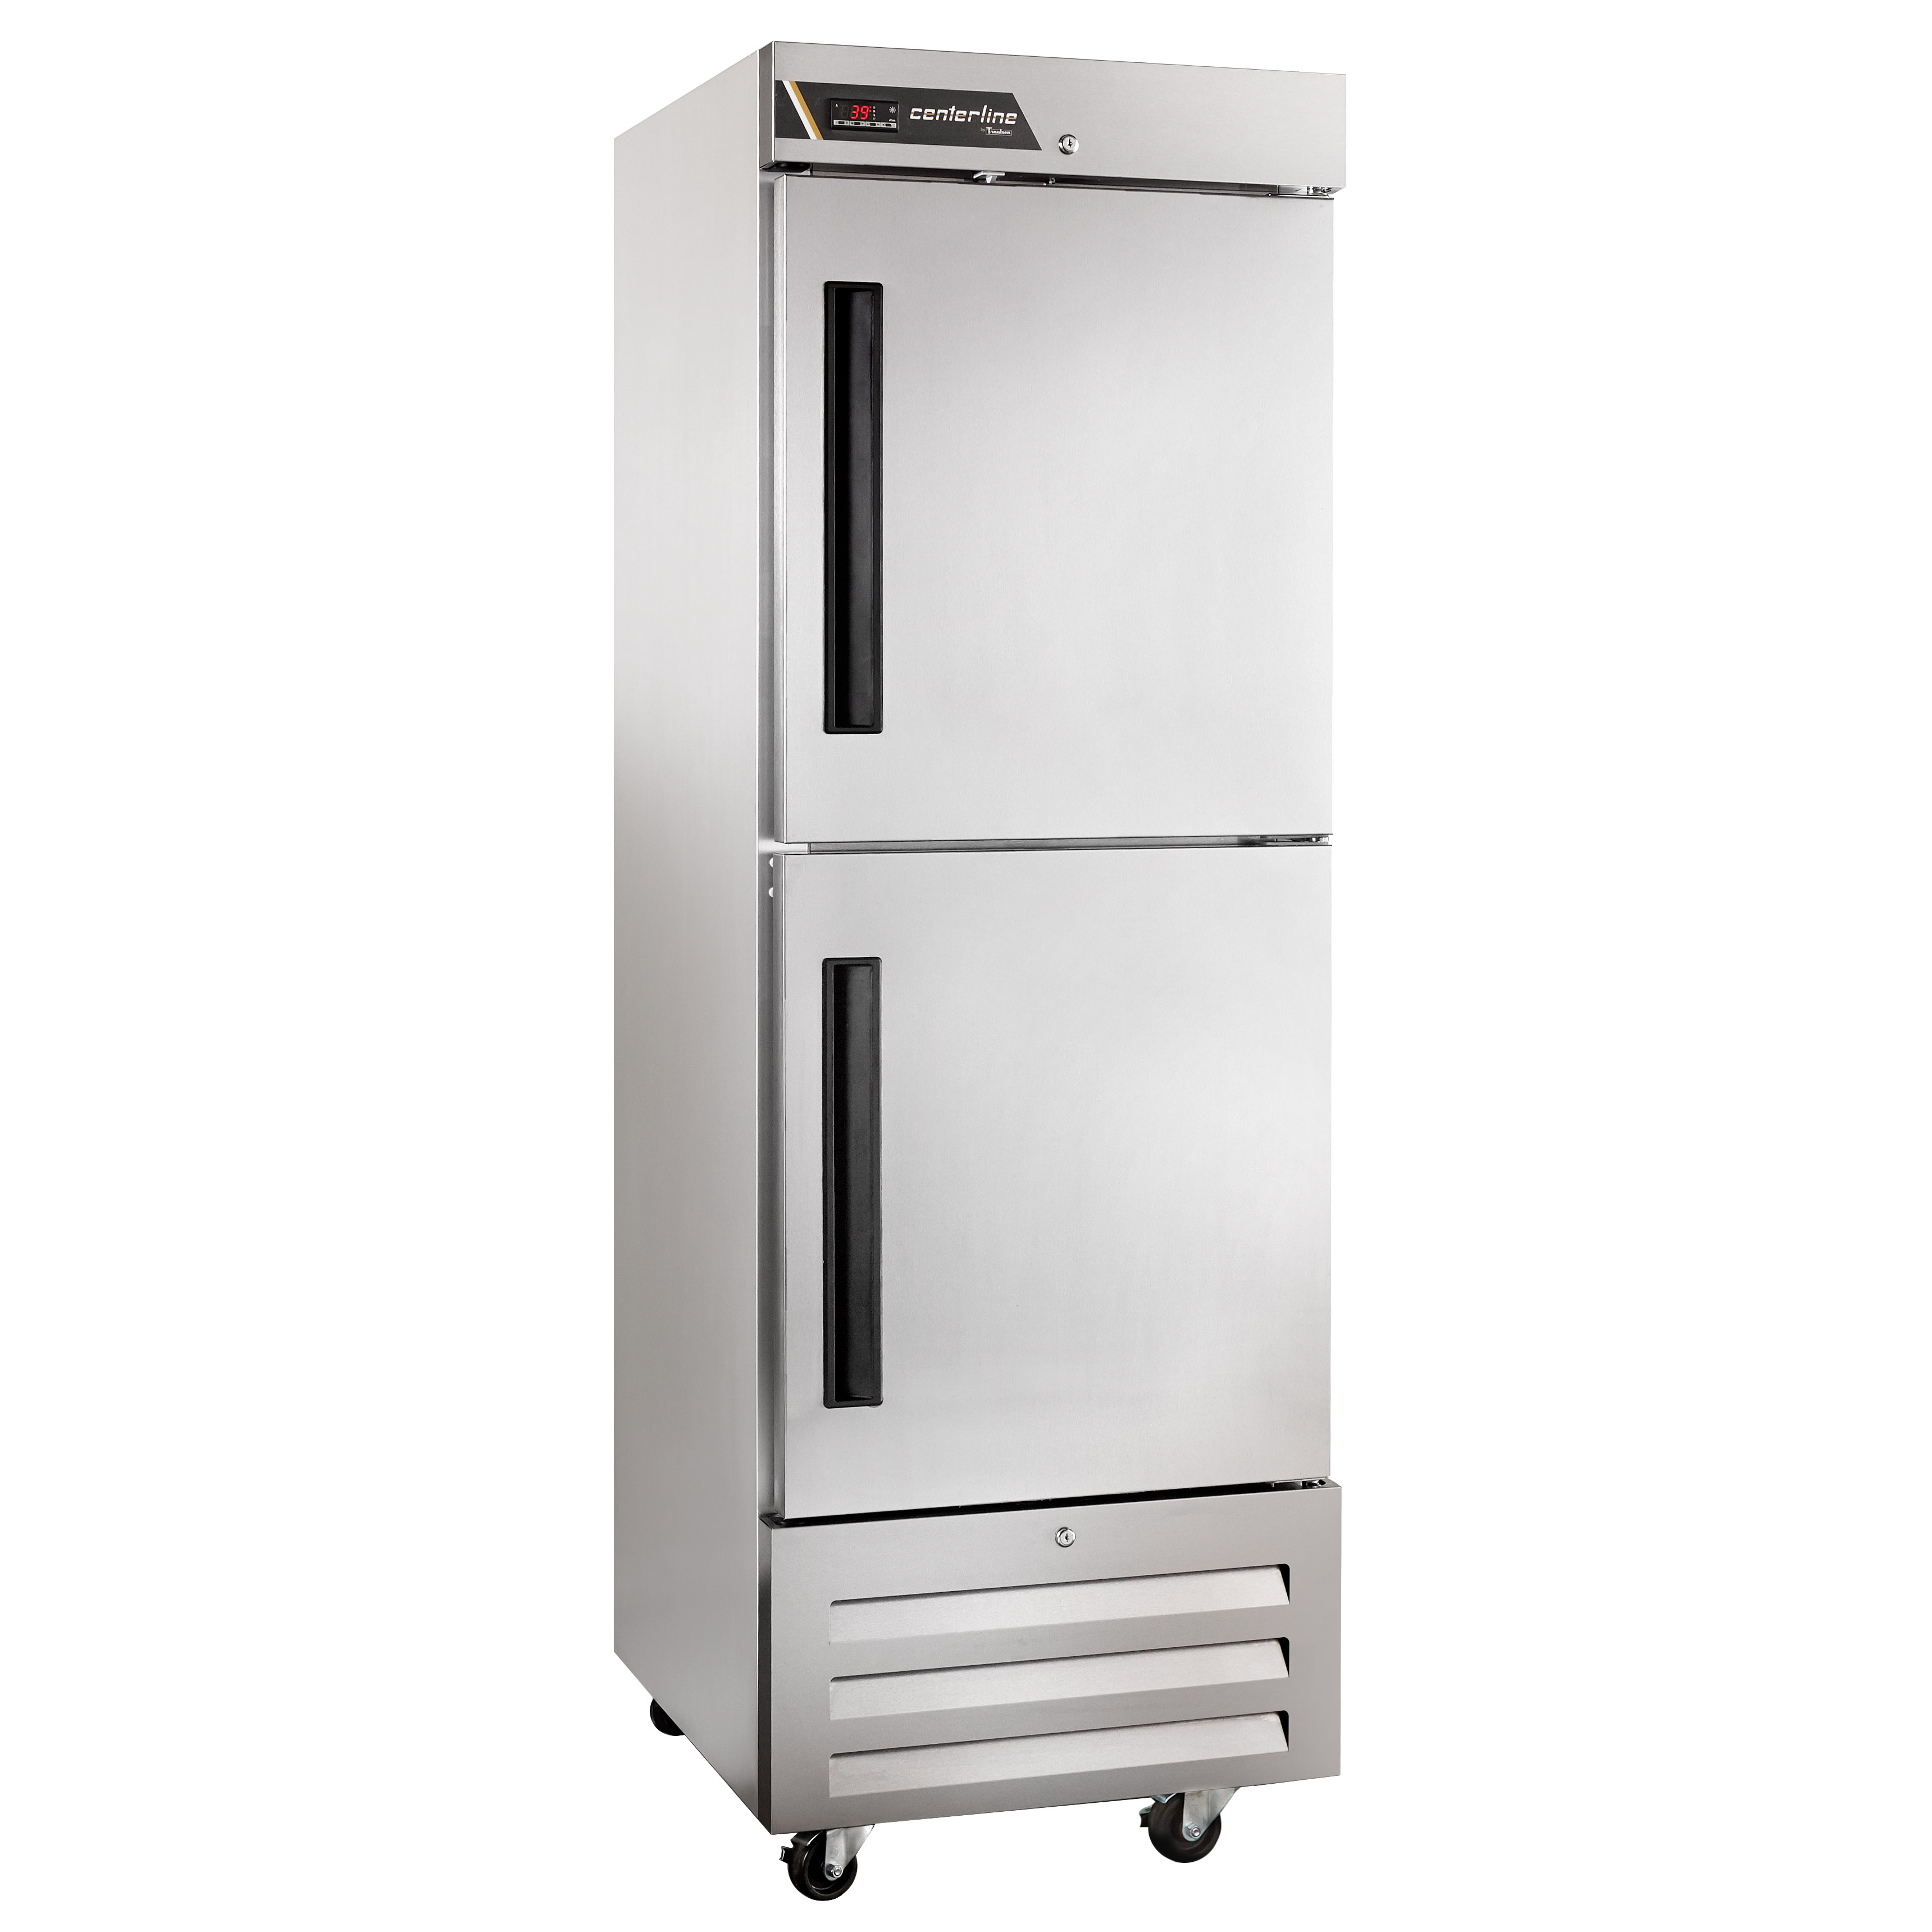 Traulsen CLBM-23R-HS-R One Section Solid Door Reach-In Refrigerator, 20.5 cu. ft.